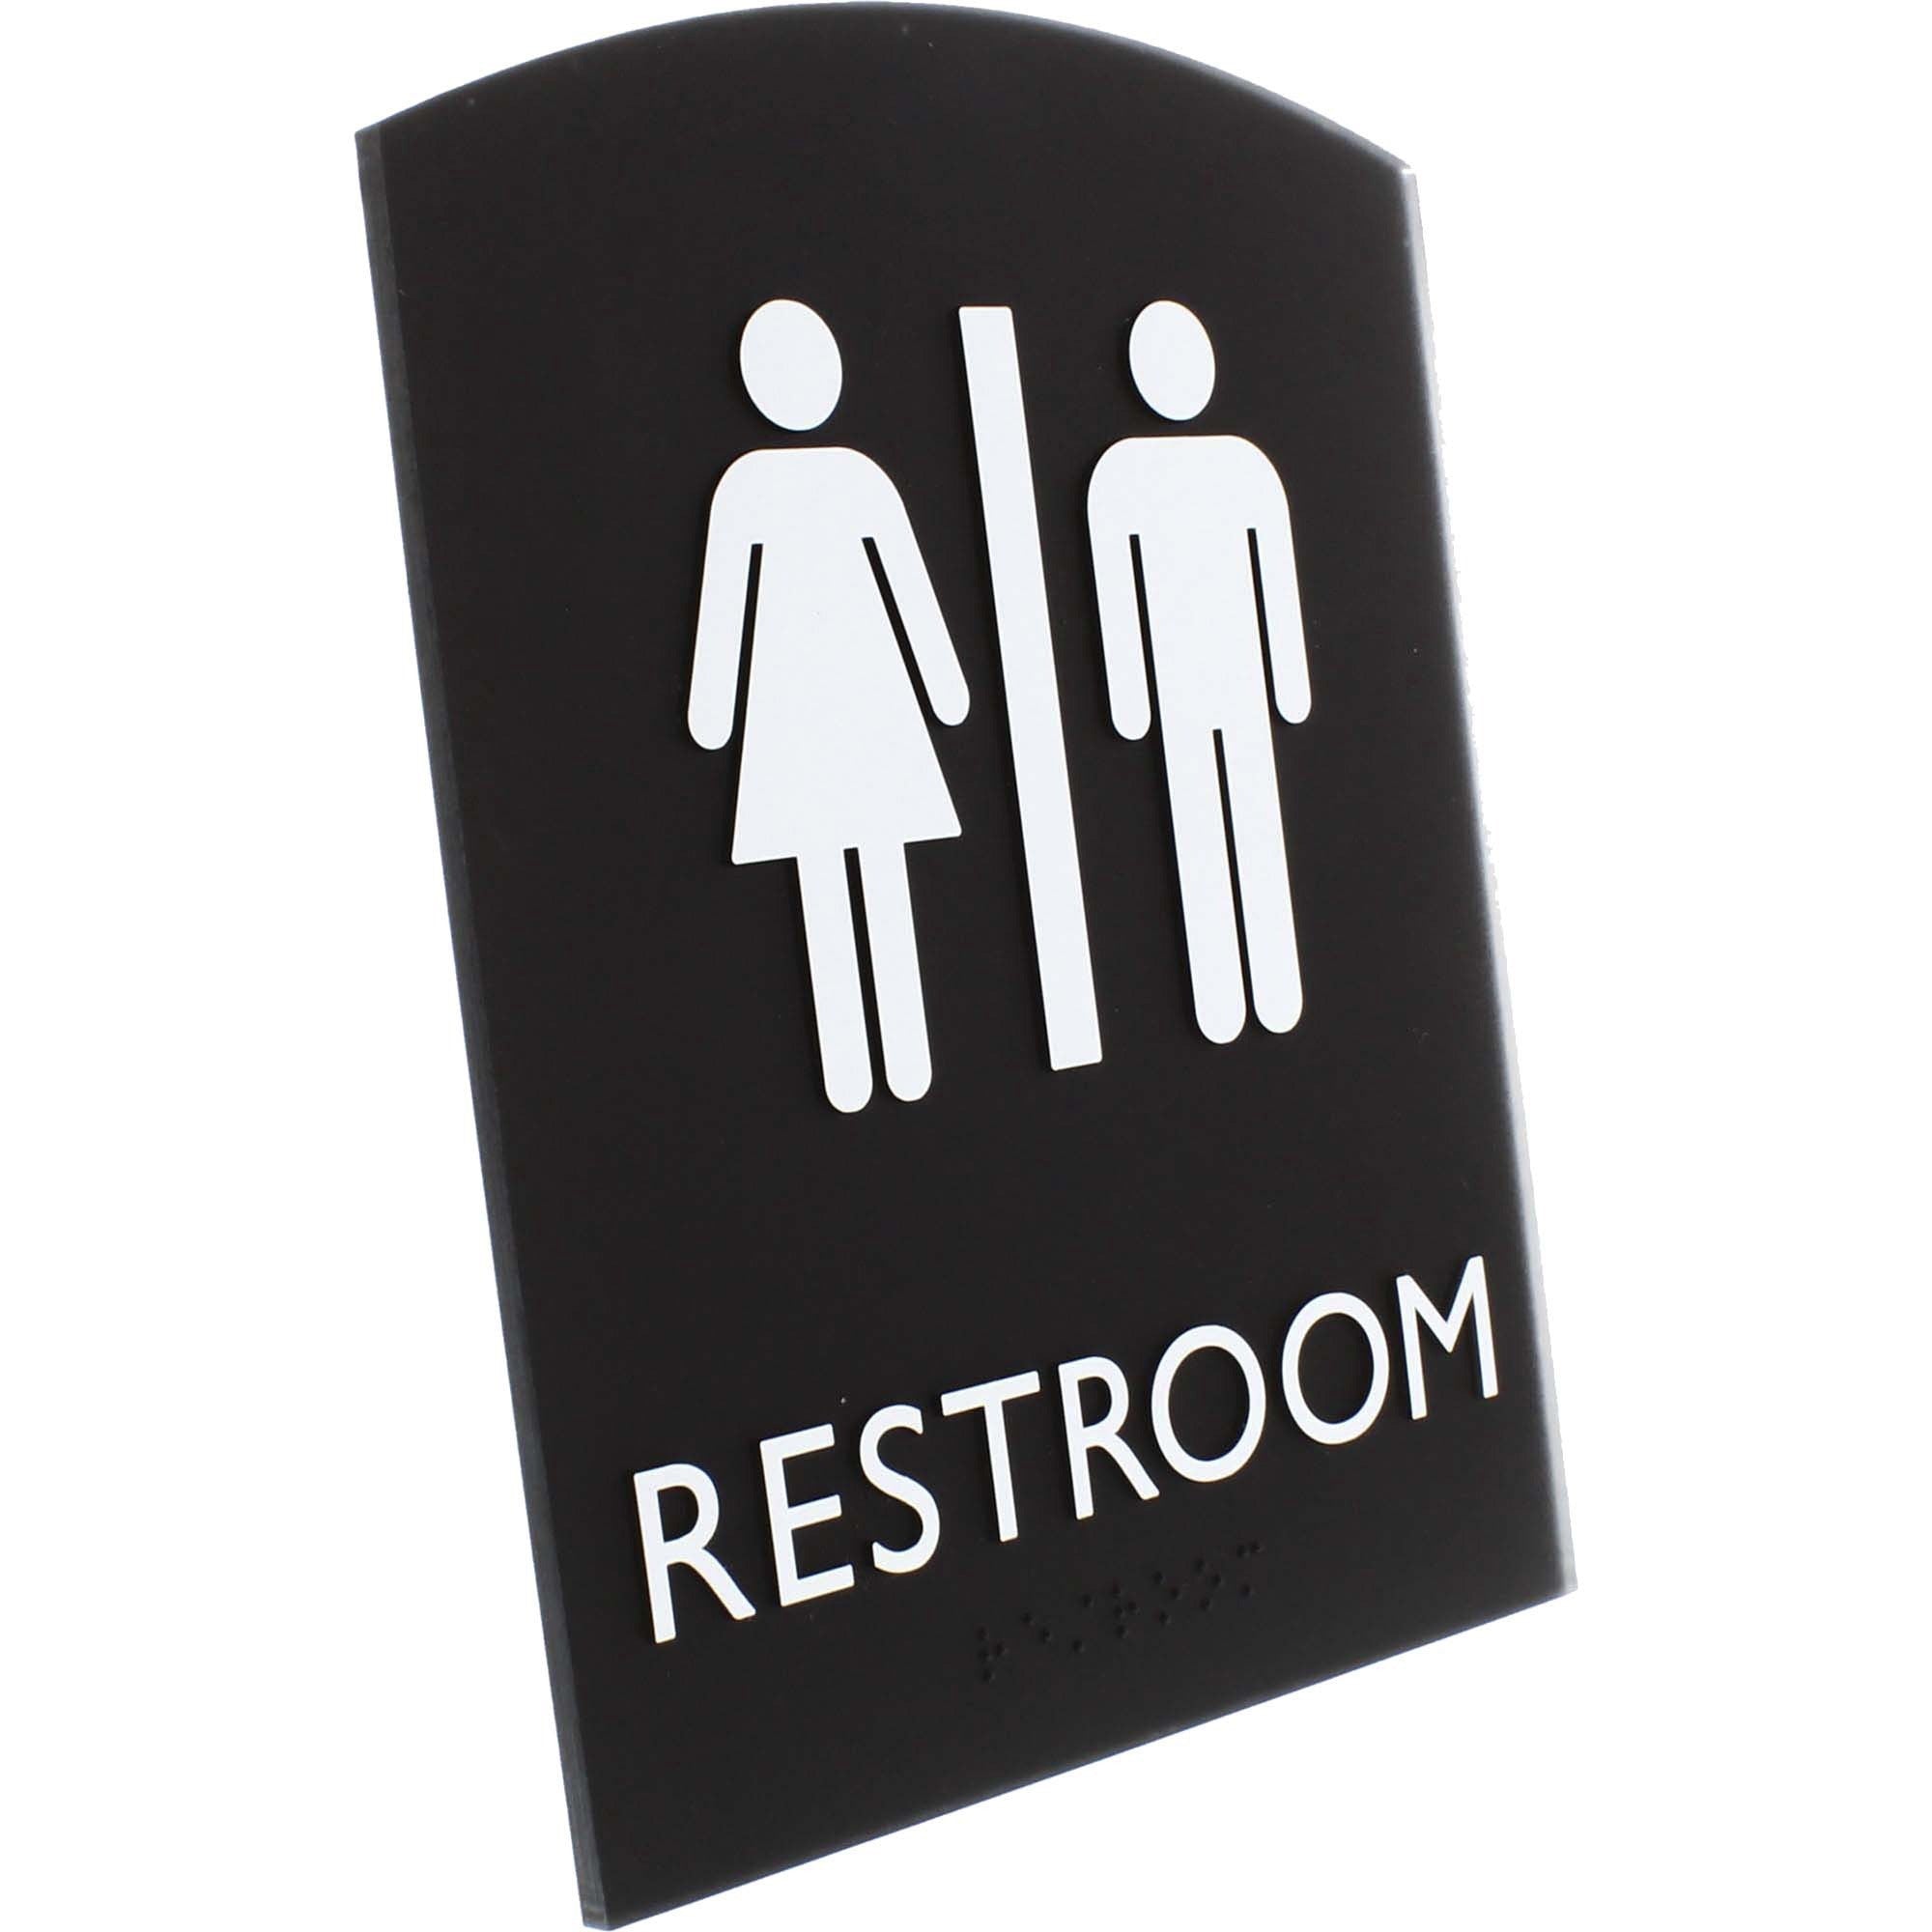 lorell-arched-unisex-restroom-sign-1-each-68-width-x-85-height-rectangular-shape-surface-mountable-easy-readability-braille-plastic-black_llr02672 - 3